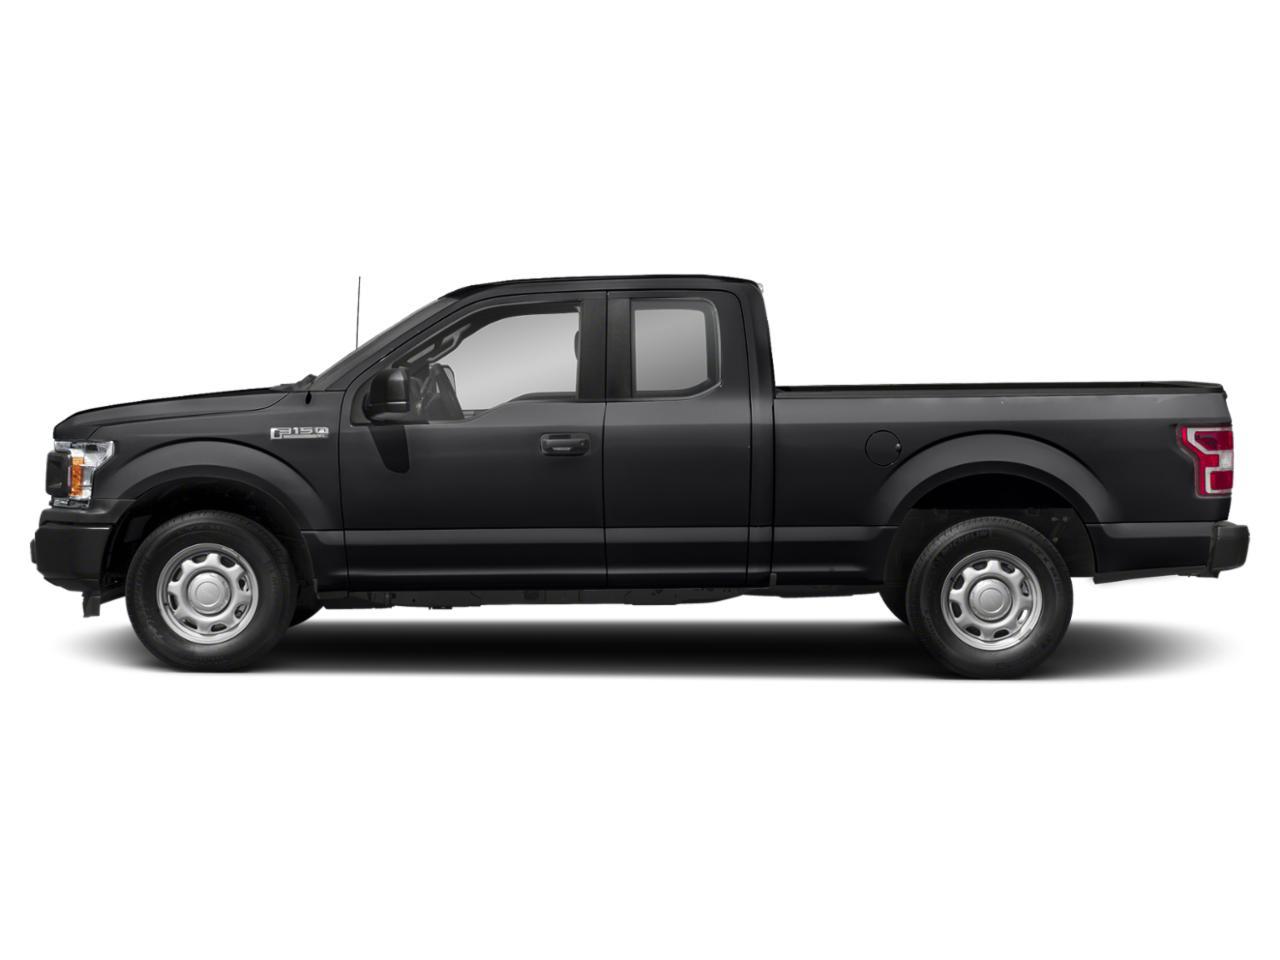 2019 Ford F-150 Vehicle Photo in St. Petersburg, FL 33713